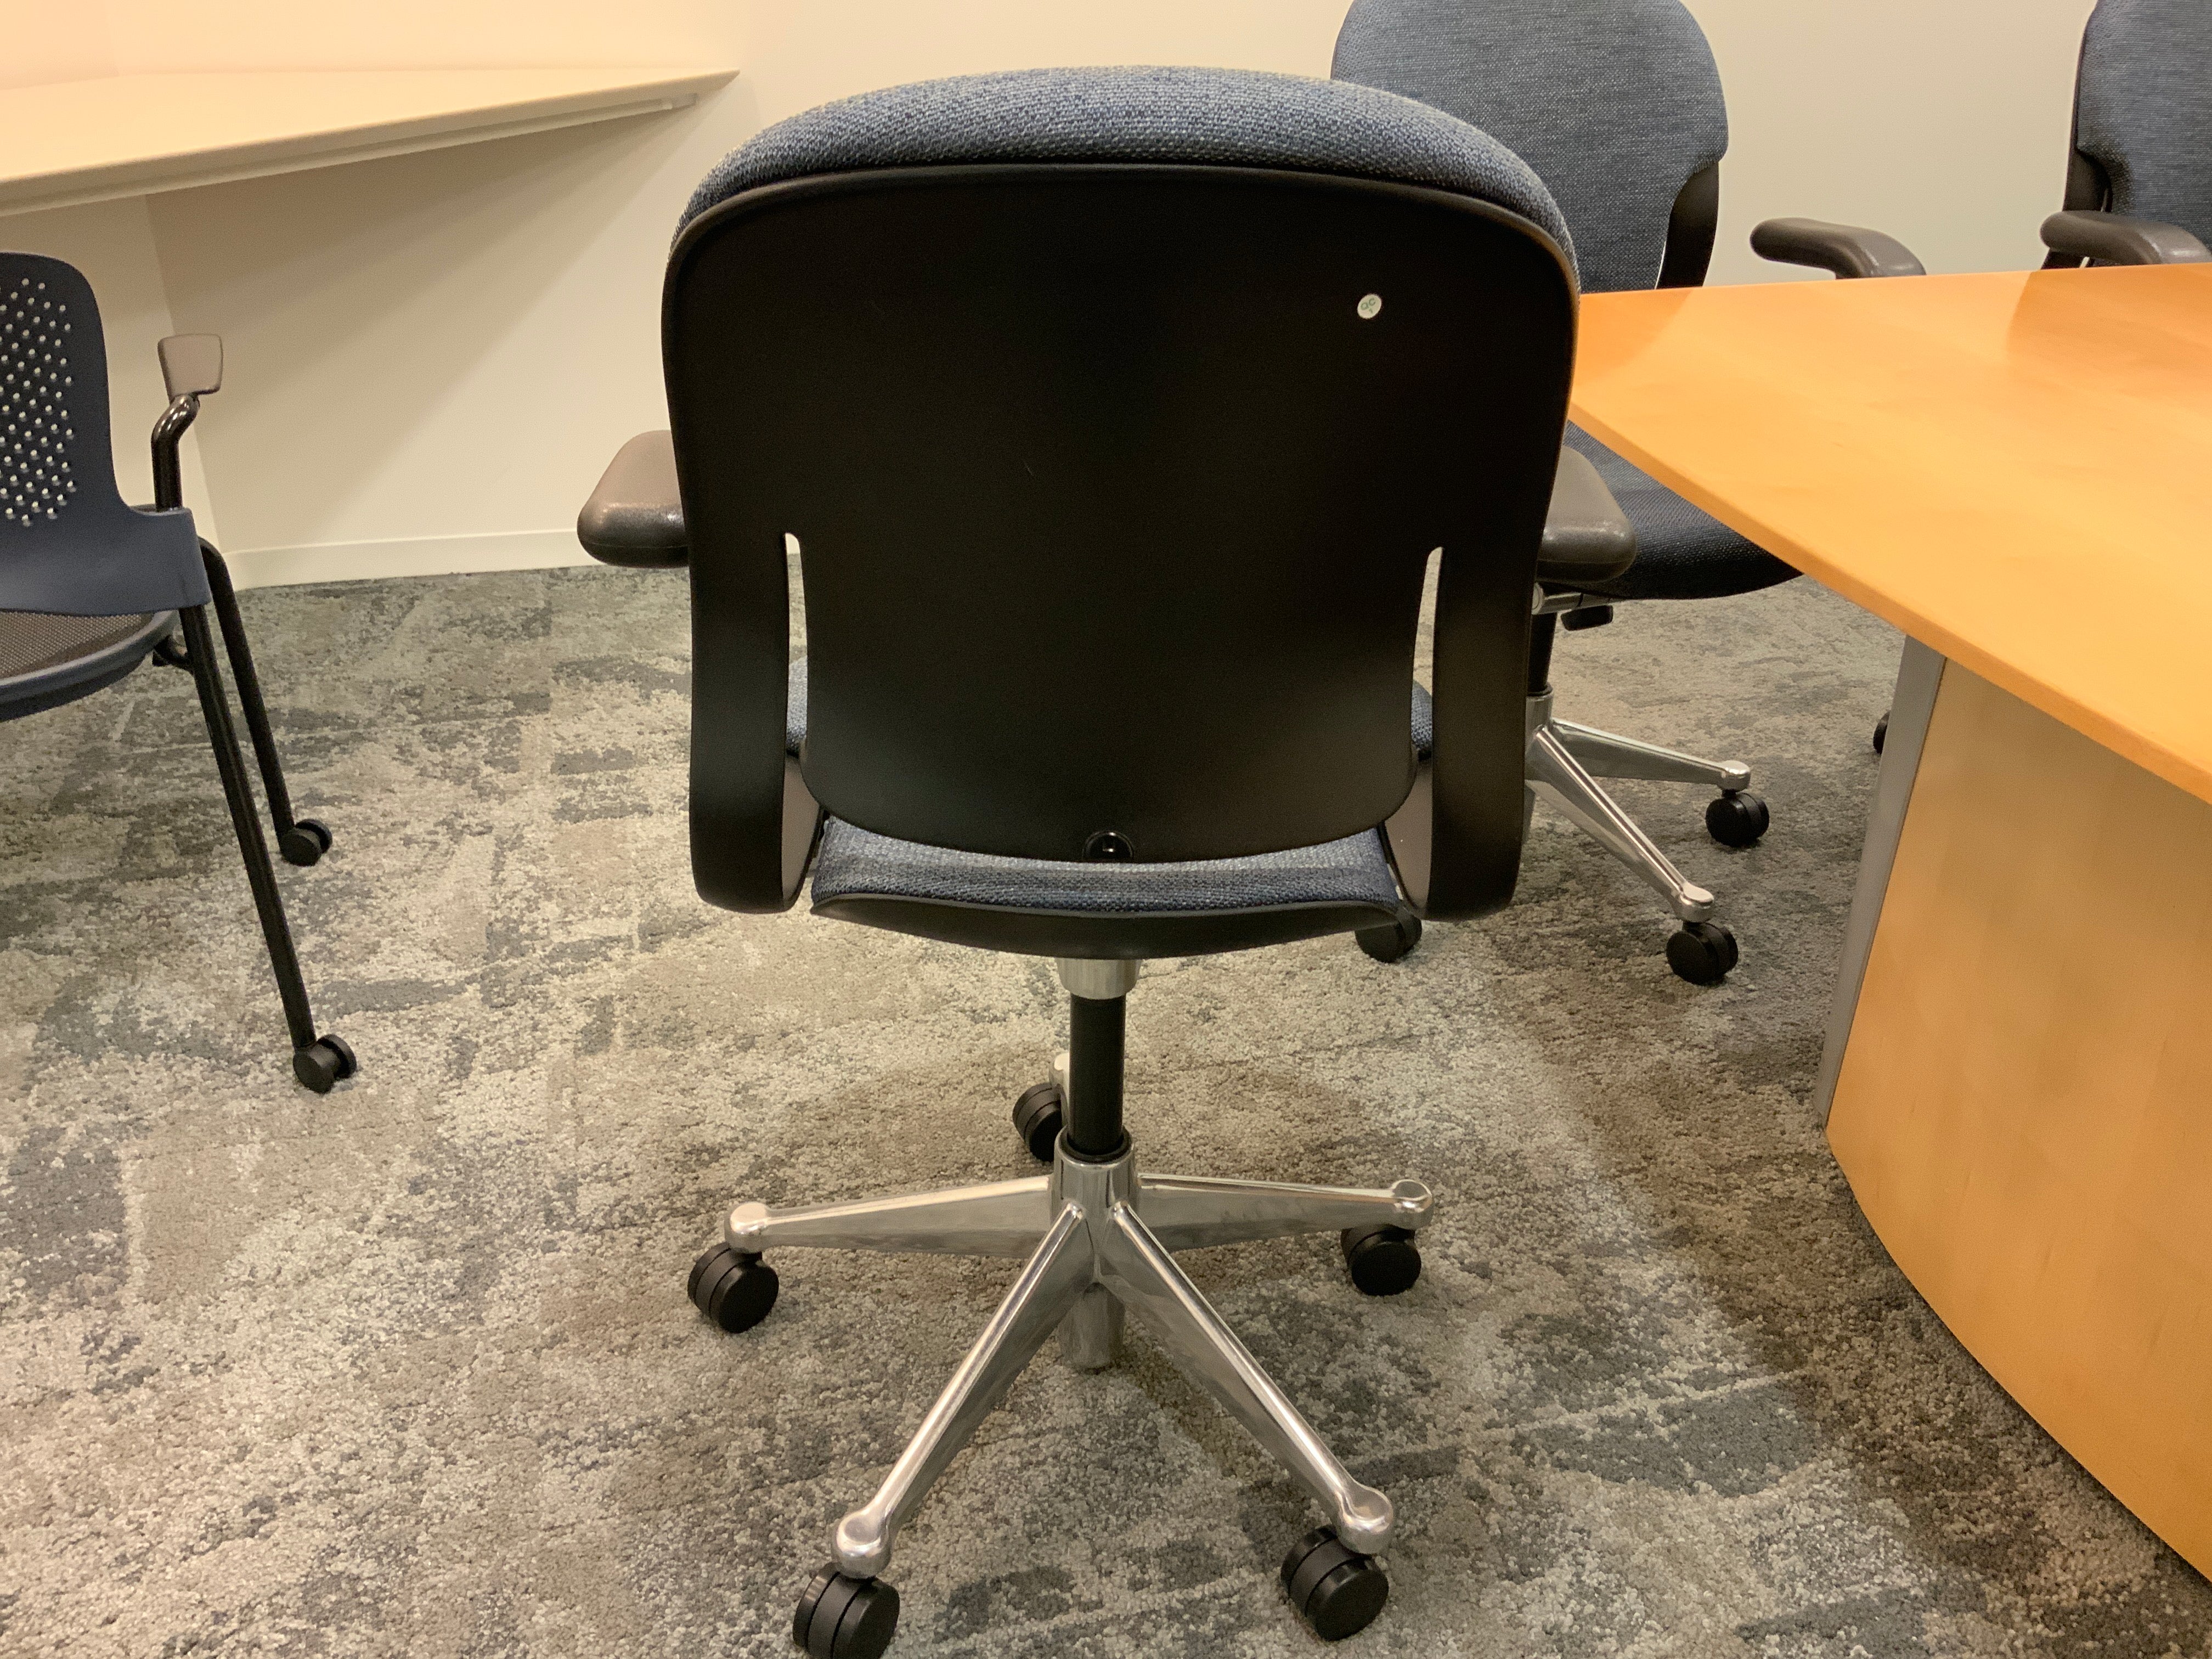 Herman Miller Equa Task Chair - Preowned - FOB Vernon Hills, IL (Min Purchase Qty = 20)